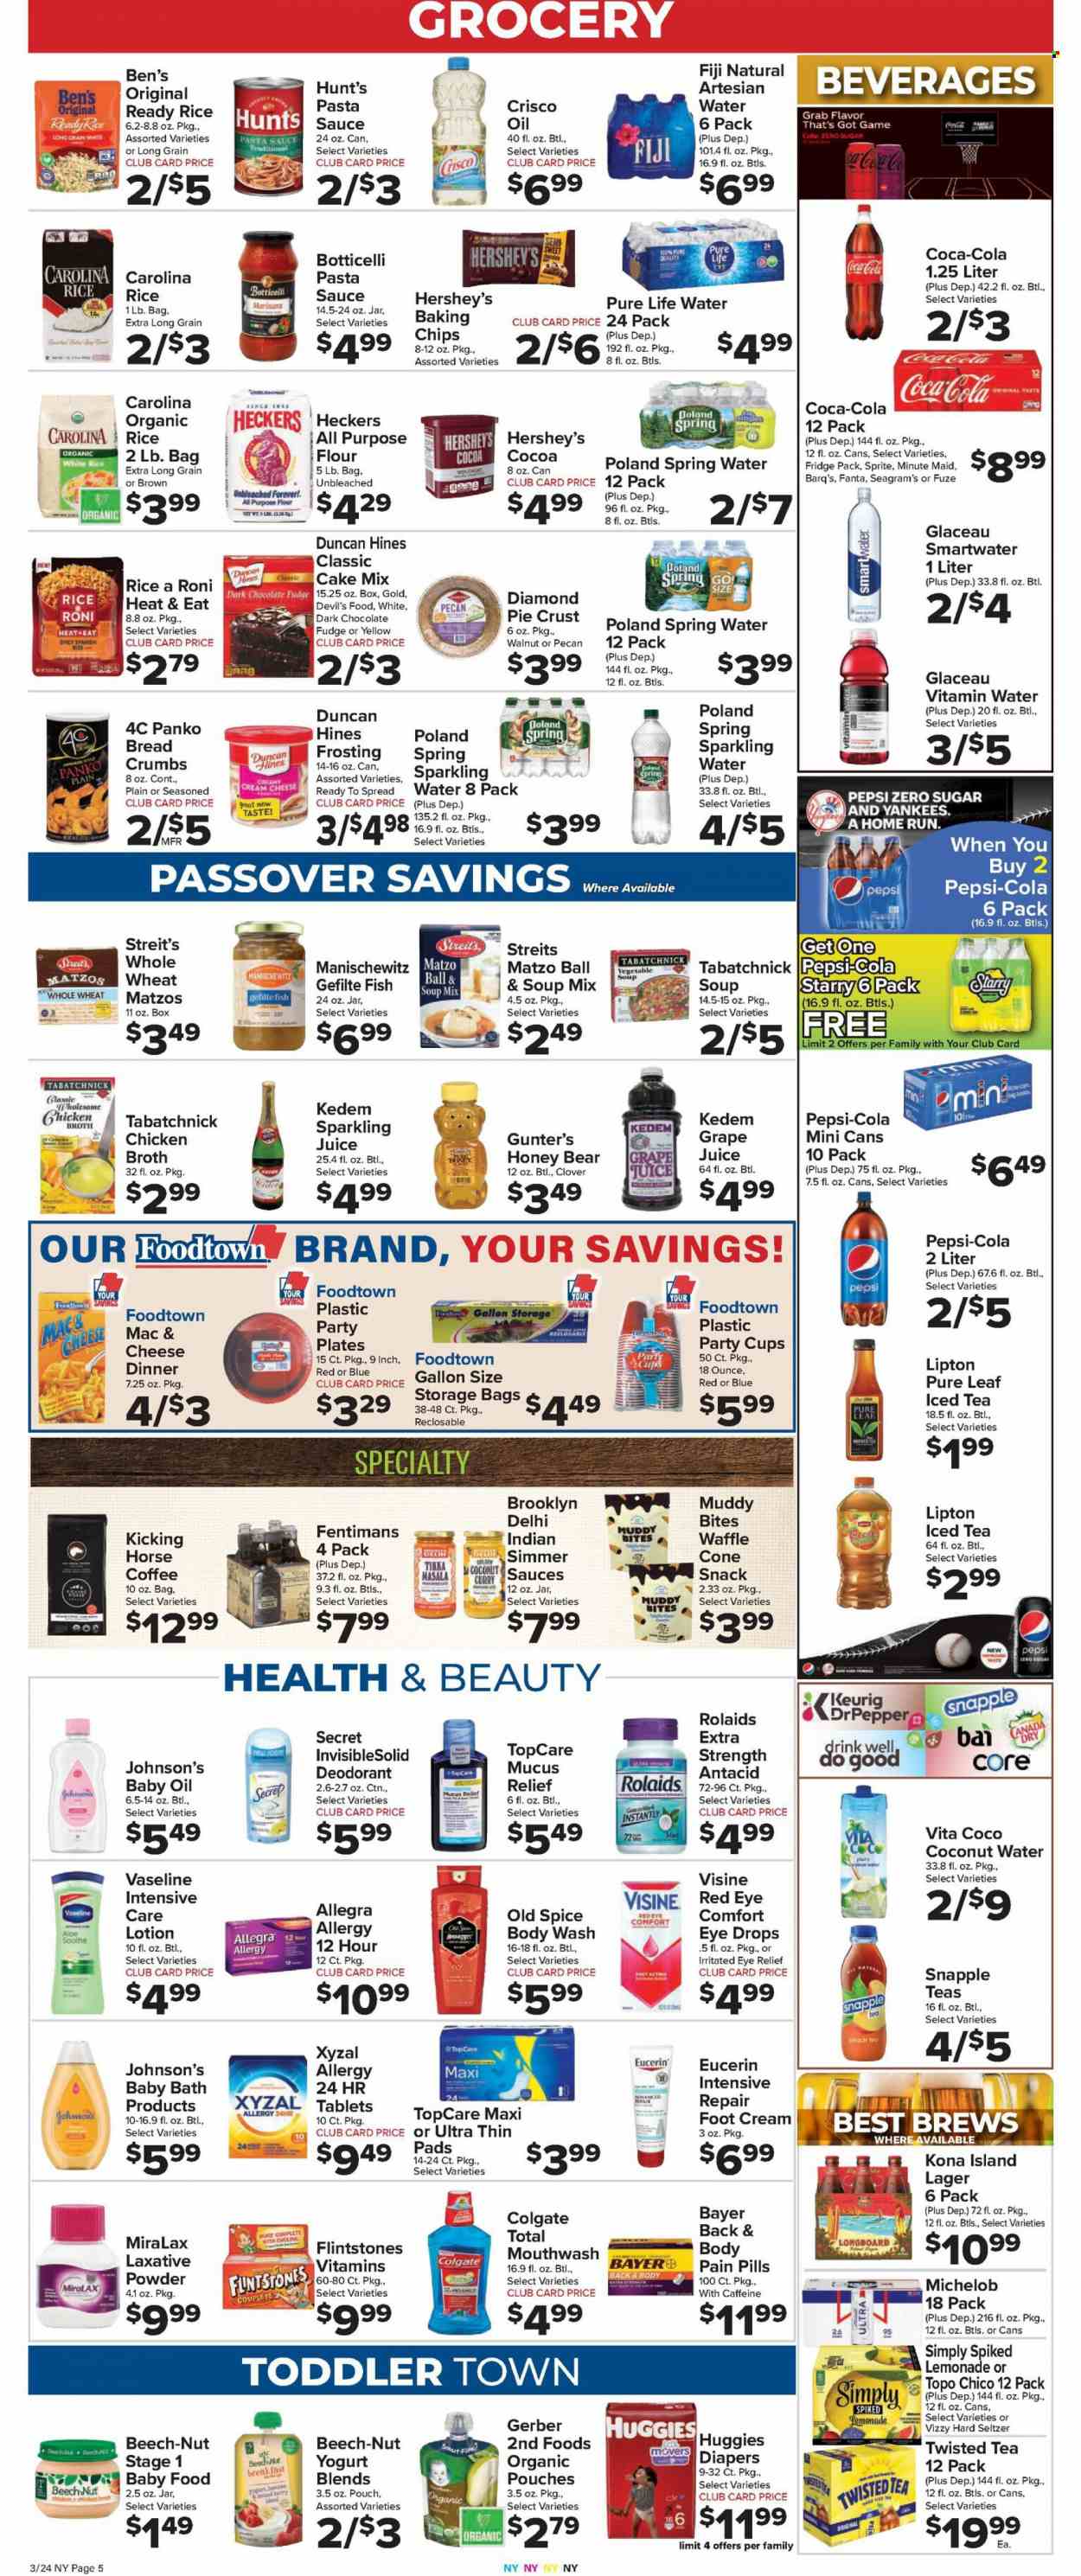 thumbnail - Foodtown Flyer - 03/24/2023 - 03/30/2023 - Sales products - cheesecake, breadcrumbs, cake mix, panko breadcrumbs, fish, vegetable soup, pasta sauce, soup mix, soup, Tikka Masala, cream cheese, yoghurt, Clover, Hershey's, fudge, snack, dark chocolate, Gerber, all purpose flour, cocoa, Crisco, flour, frosting, pie crust, chicken broth, broth, baking chips, white rice, spice, oil, honey, Canada Dry, Coca-Cola, lemonade, Sprite, Pepsi, juice, Fanta, Lipton, ice tea, coconut water, Coca-Cola zero, Snapple, sparkling juice, Kedem, Bai, fruit punch, Coke, spring water, sparkling water, Pure Life Water, Smartwater, vitamin water, water, Pure Leaf, coffee, Keurig, Hard Seltzer, beer, Lager, Huggies, nappies, Johnson's, baby bath, baby oil, body wash, Old Spice, Vaseline, Colgate, mouthwash, sanitary pads, body lotion, Eucerin, anti-perspirant, deodorant, storage bag, plate, cup, party cups, MiraLAX, eye drops, Antacid, laxative, Bayer, Twisted Tea, Michelob. Page 7.